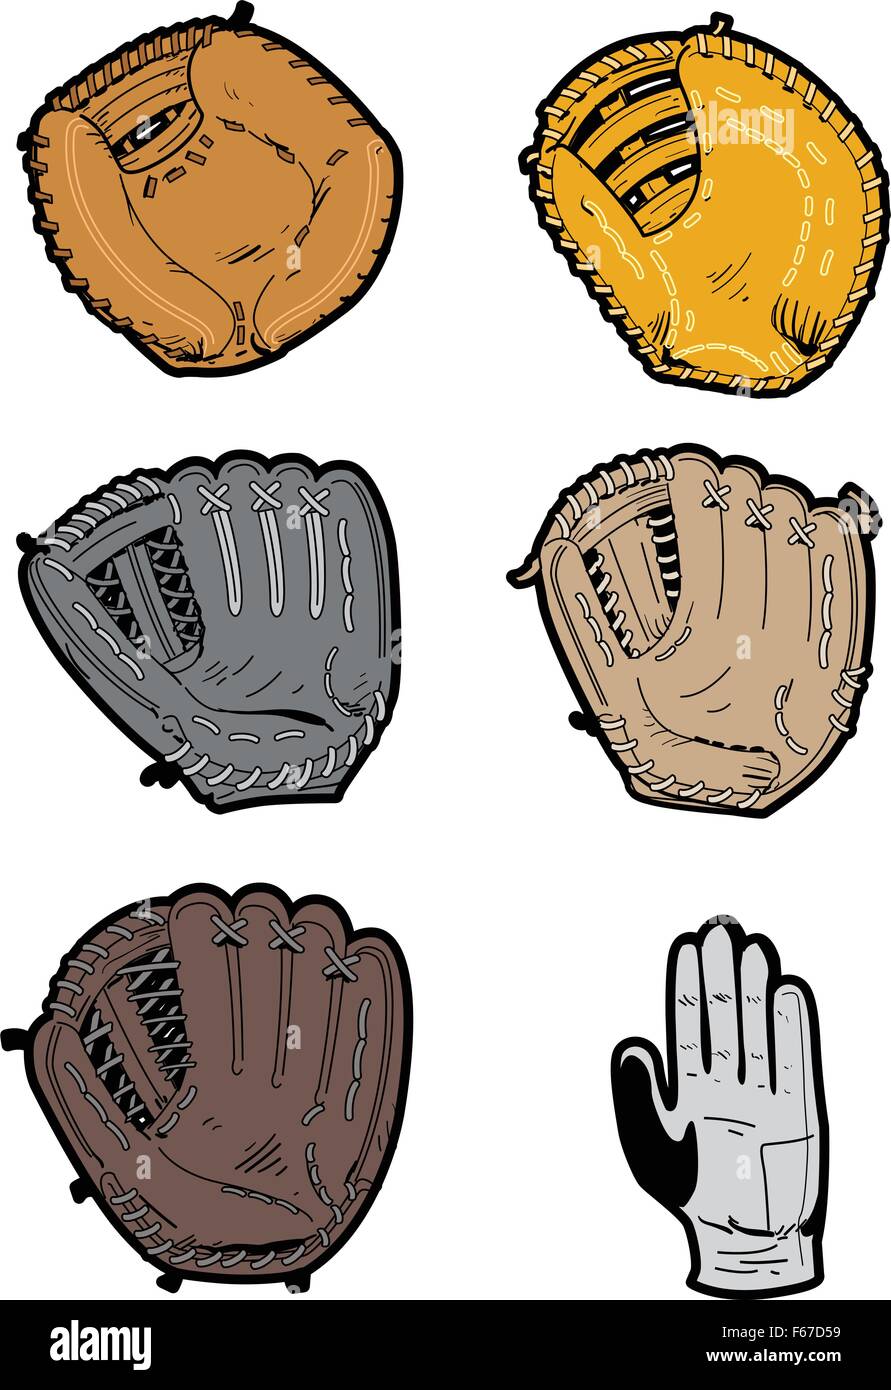 A Breakdown of Different Glove Web Types